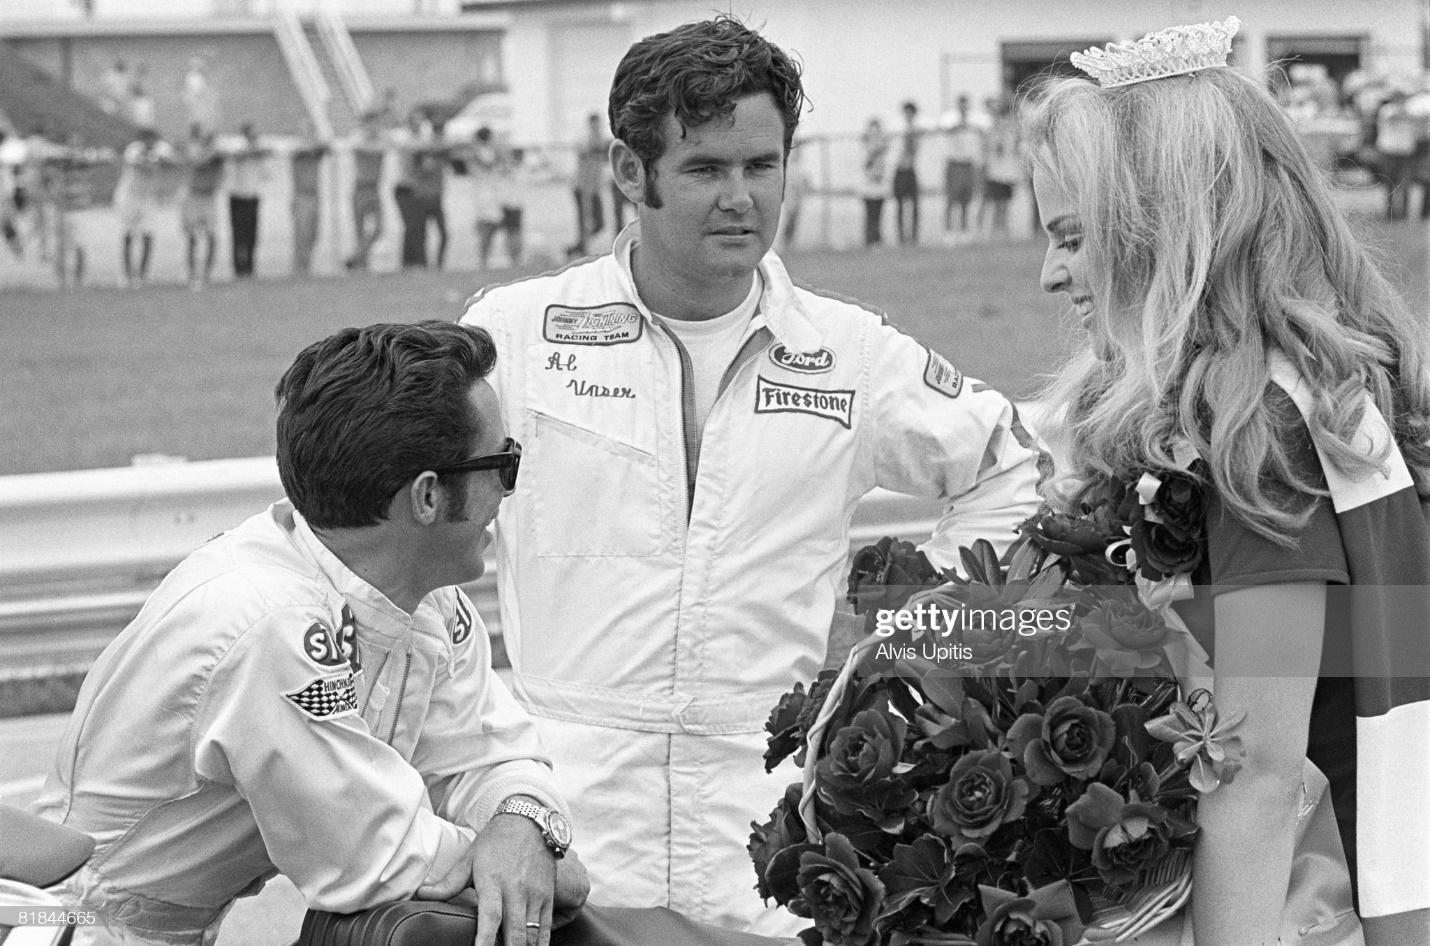 D:\Documenti\posts\posts\Women and motorsport\foto\Getty e altre\mario-andretti-and-al-unser-chat-with-the-race-queen-before-the-start-picture-id81844665.jpg